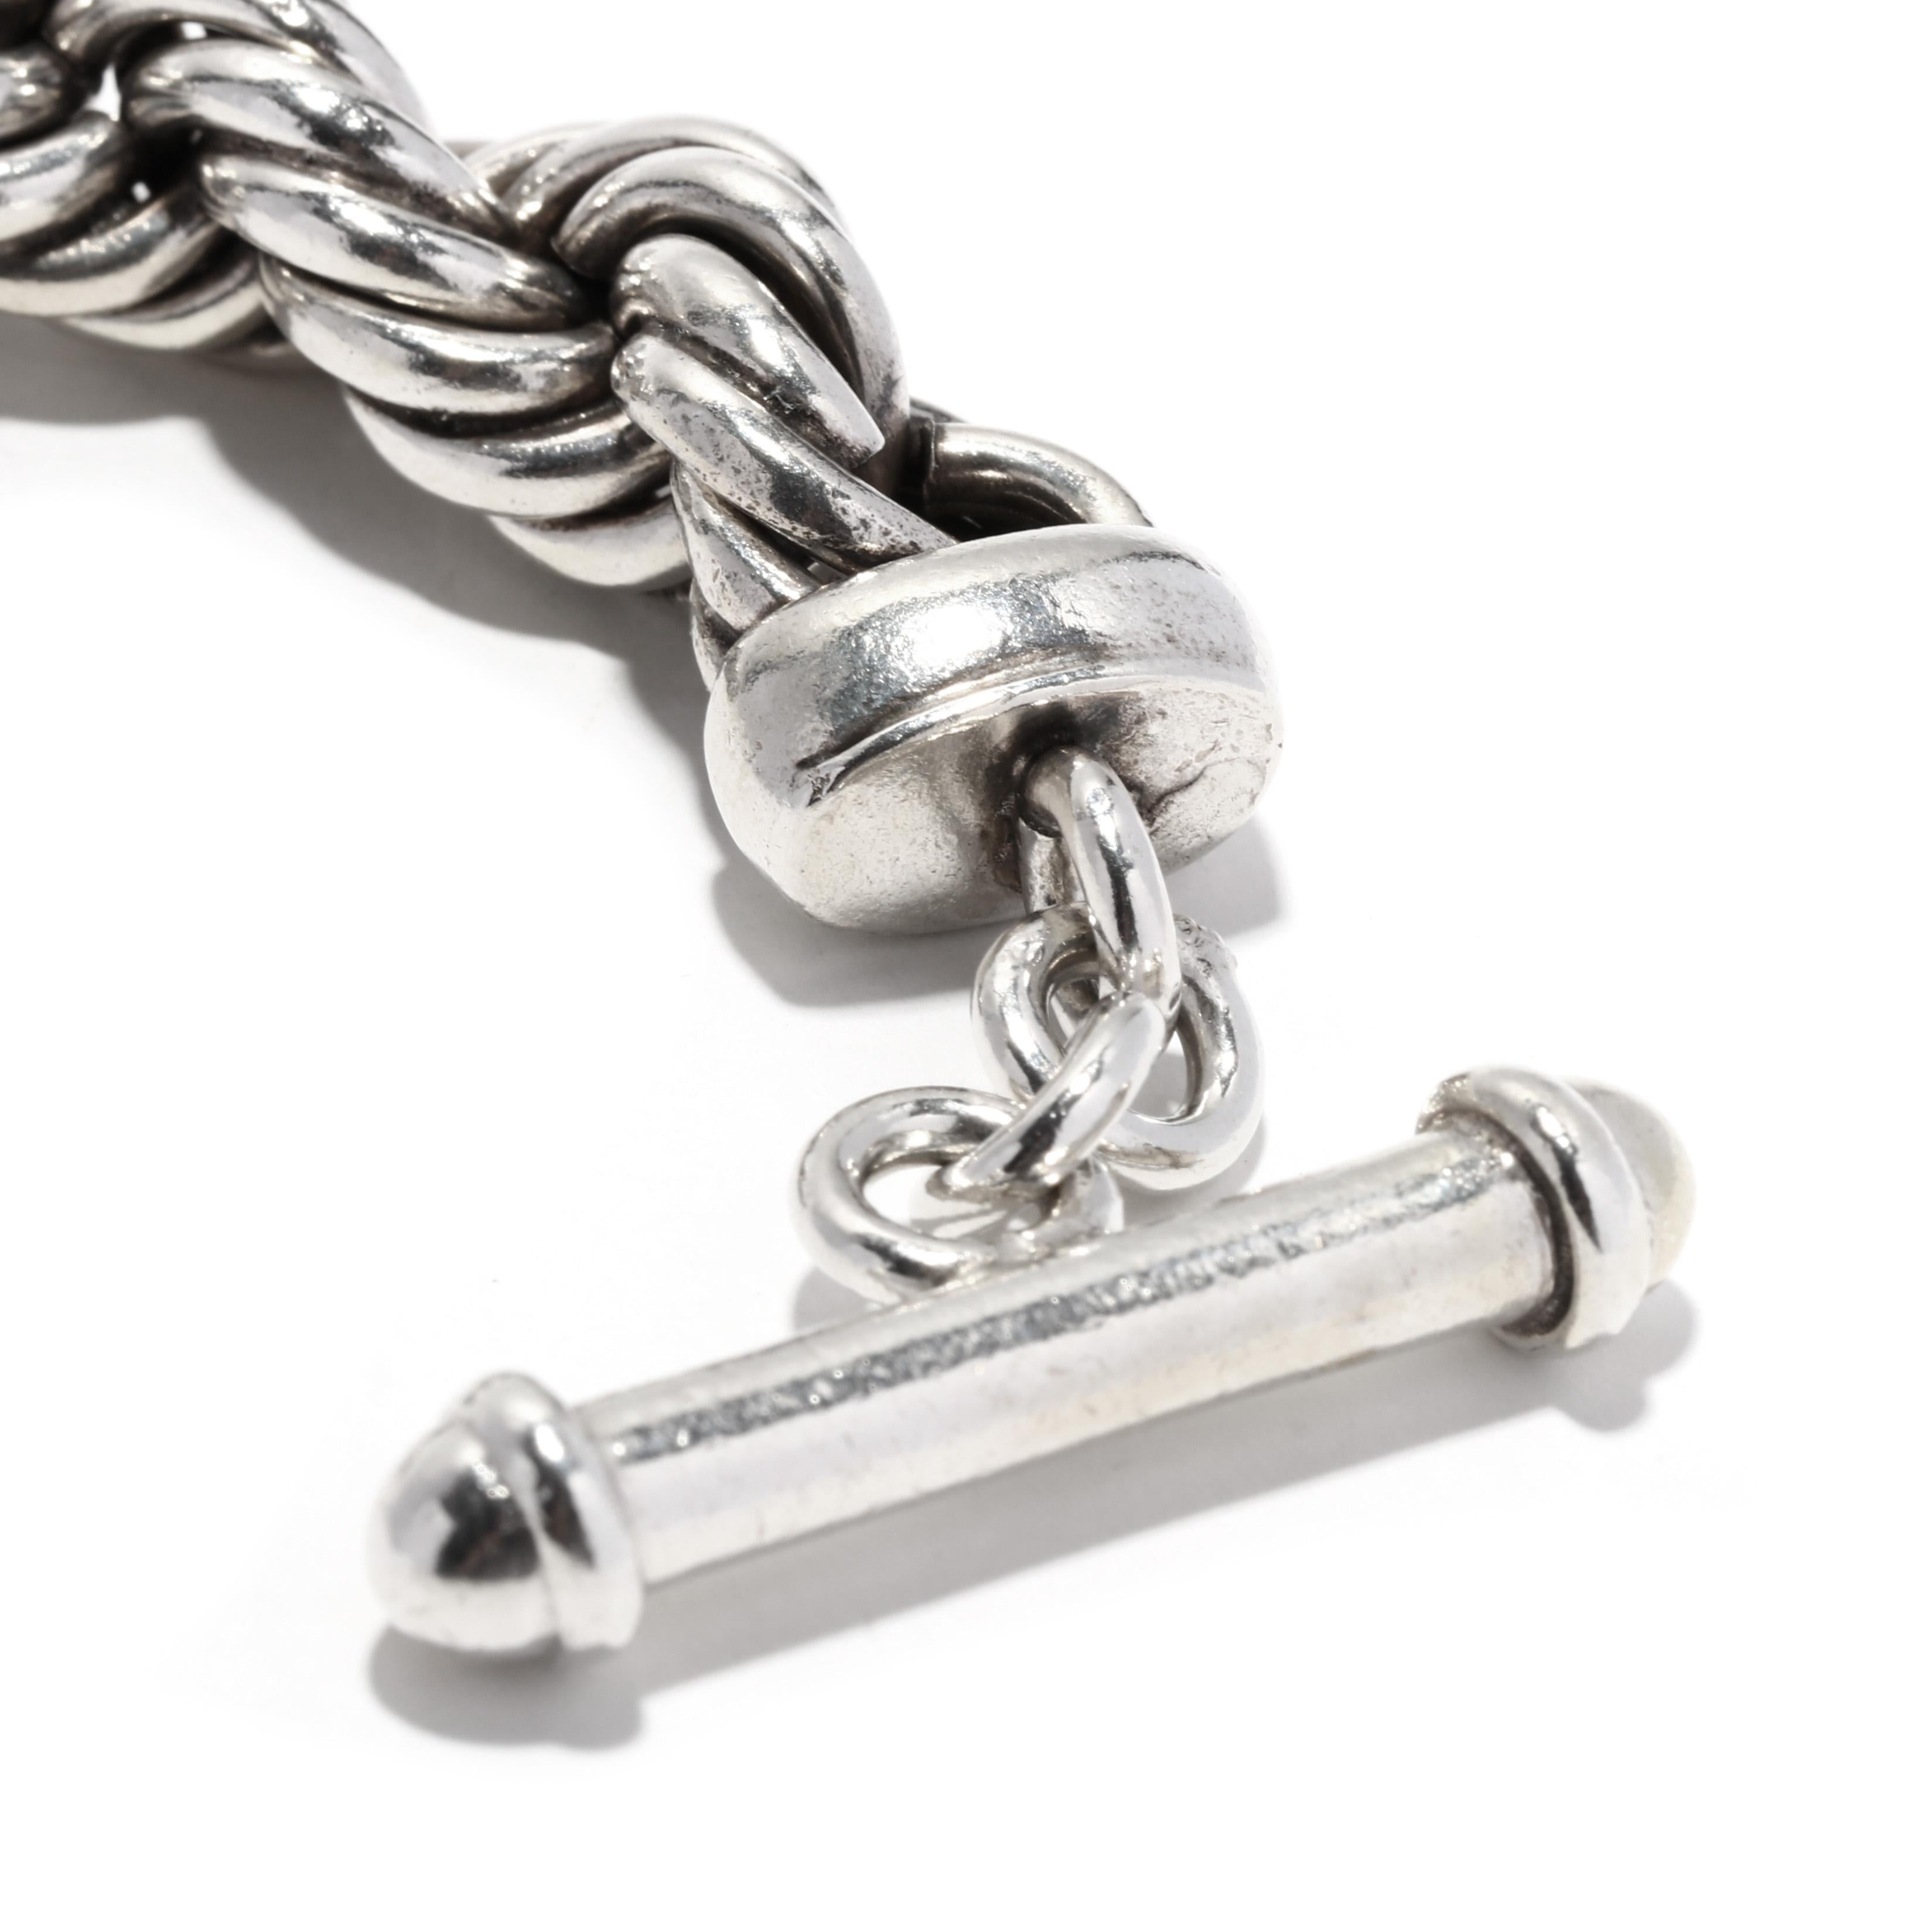 This beautiful rope twist toggle bracelet is the perfect accessory to complete any look. Crafted from sterling silver, this 8.5-inch chain bracelet features a unique rope twist toggle closure. Its simple yet elegant design will add a touch of